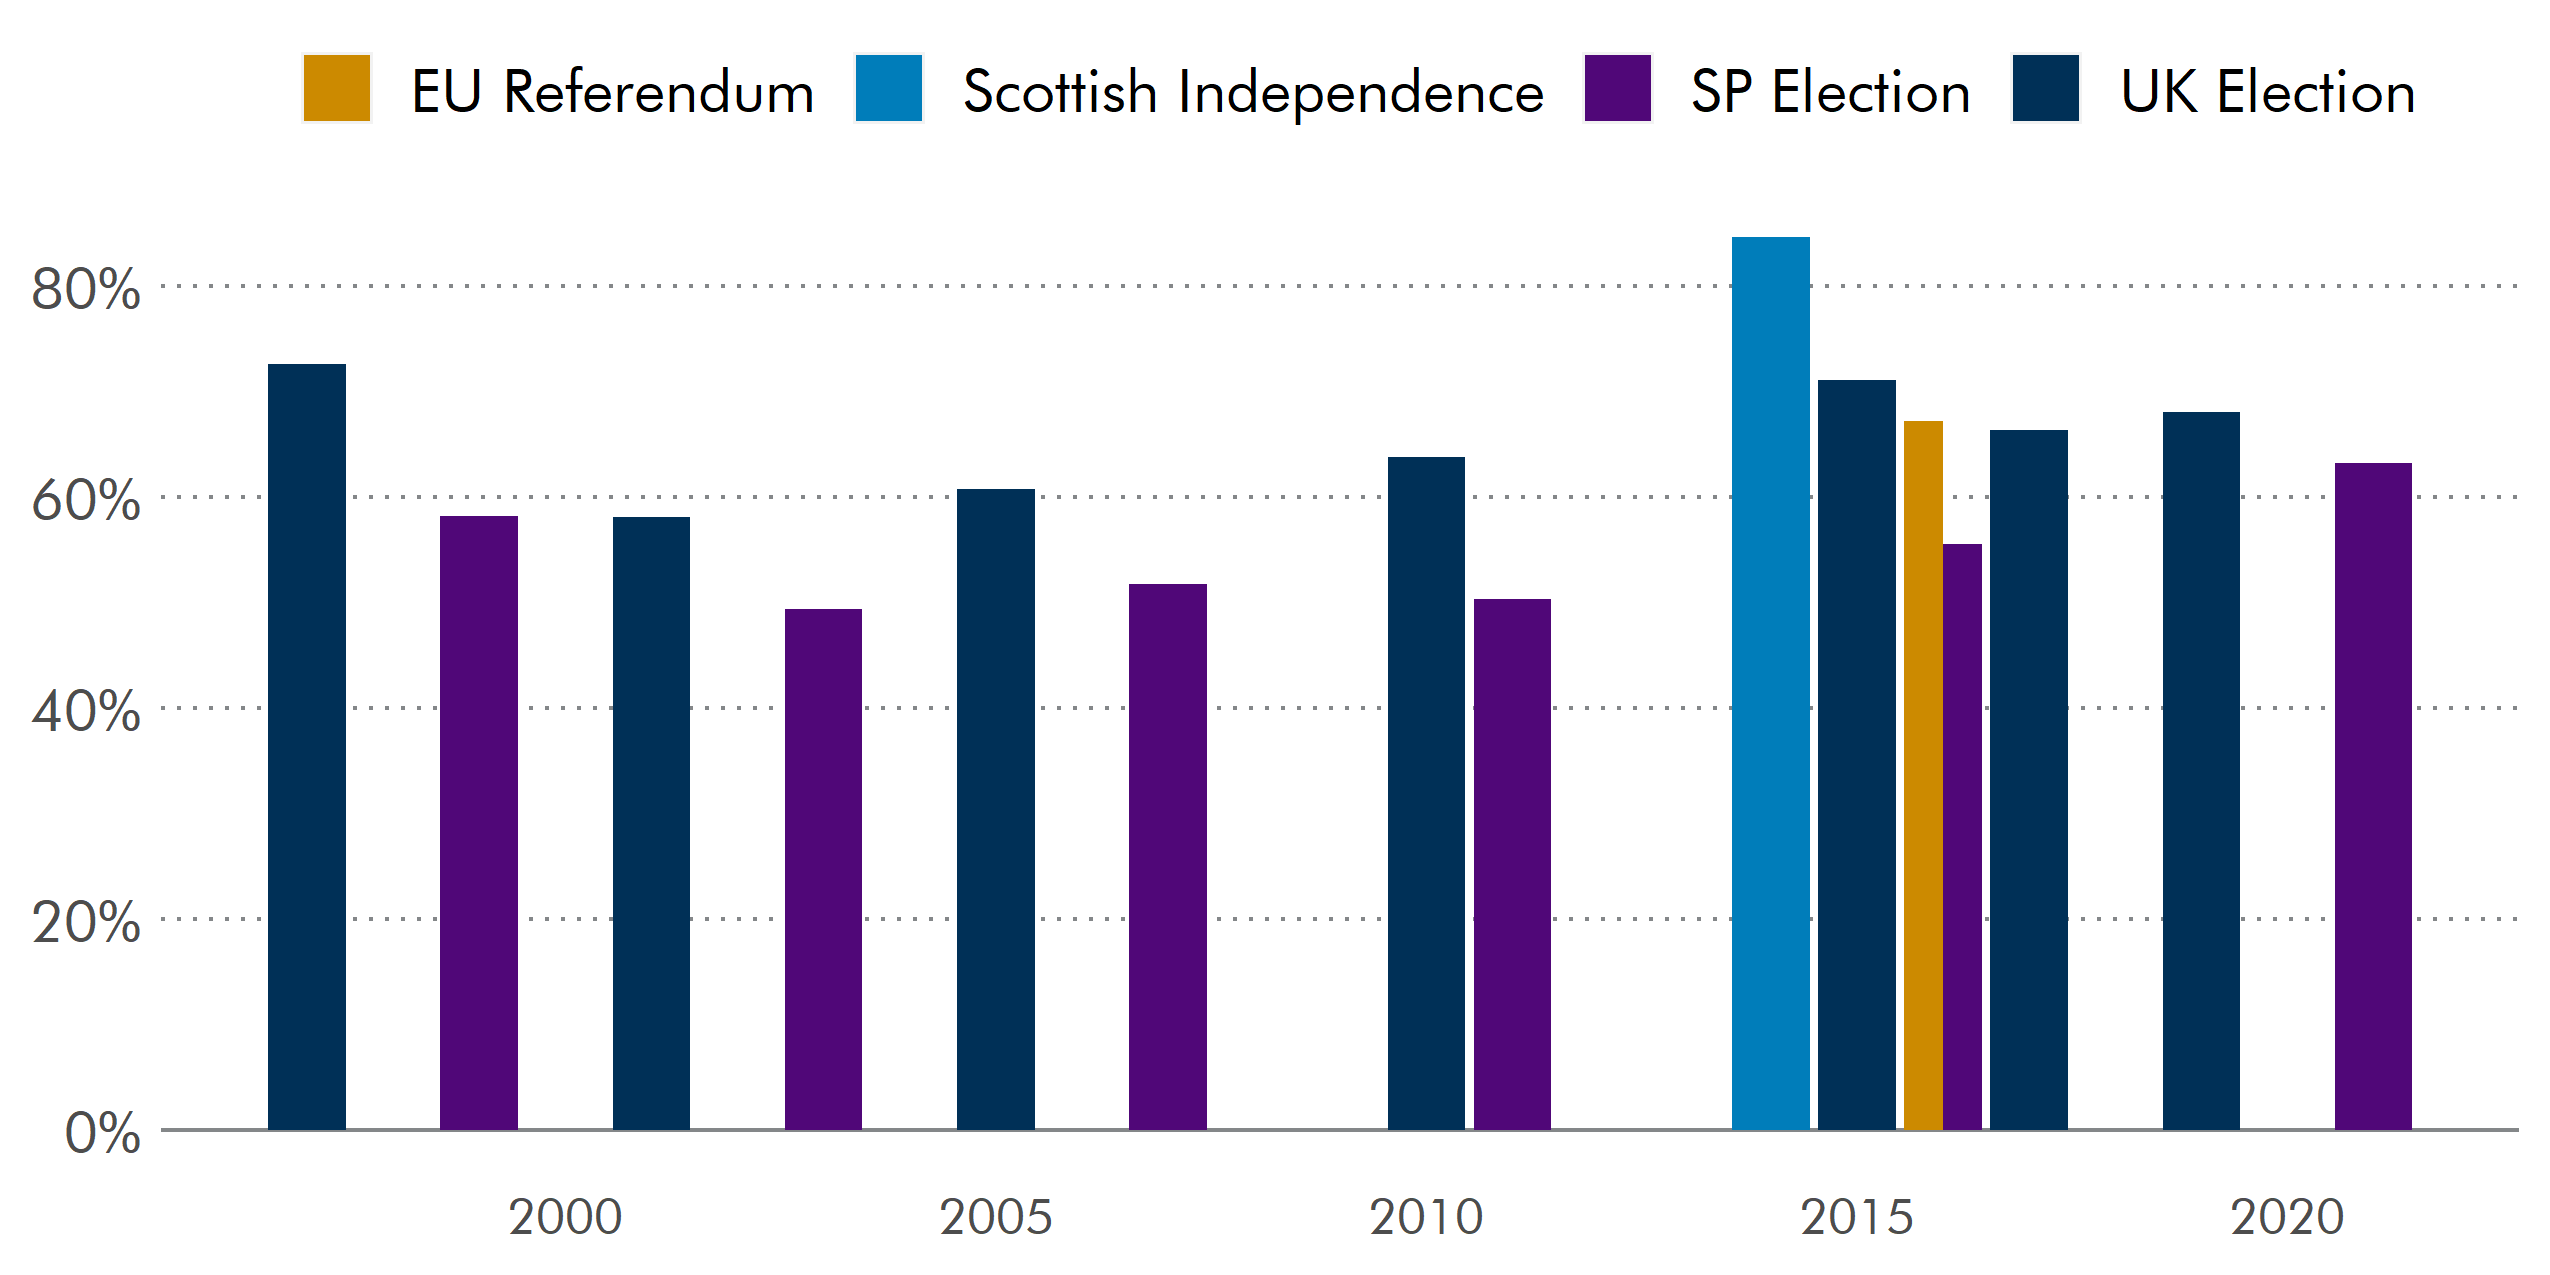 The turnout in the 2021 election was the highest for a Scottish Parliamentary election, at 63.5%.